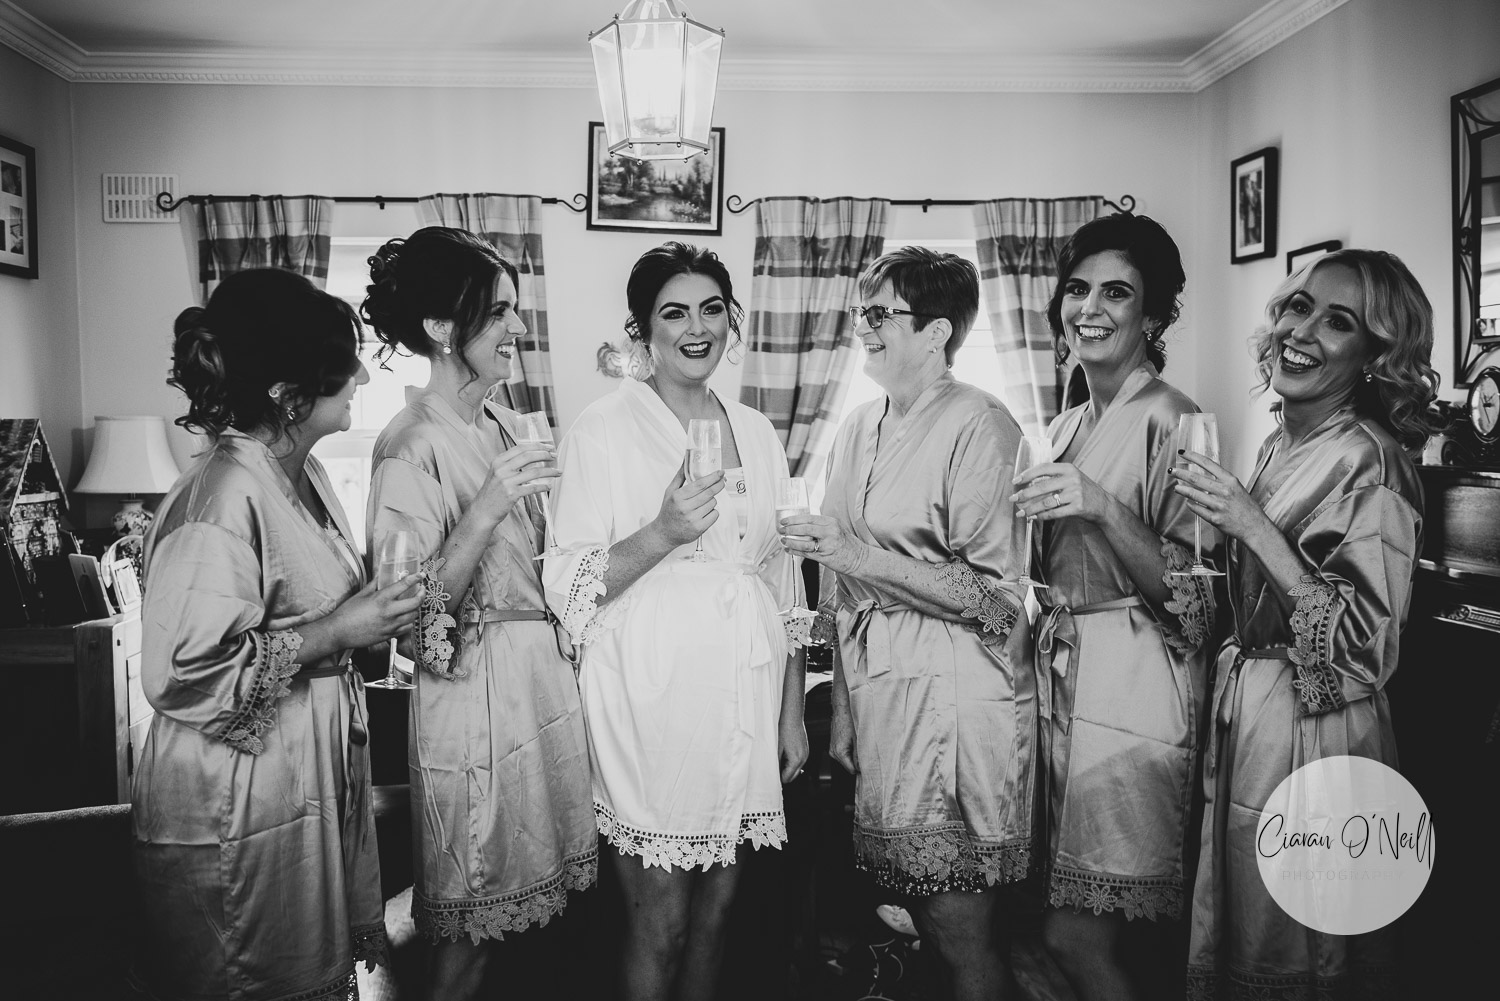 Bride and bridesmaids getting ready and celebrating with champagne